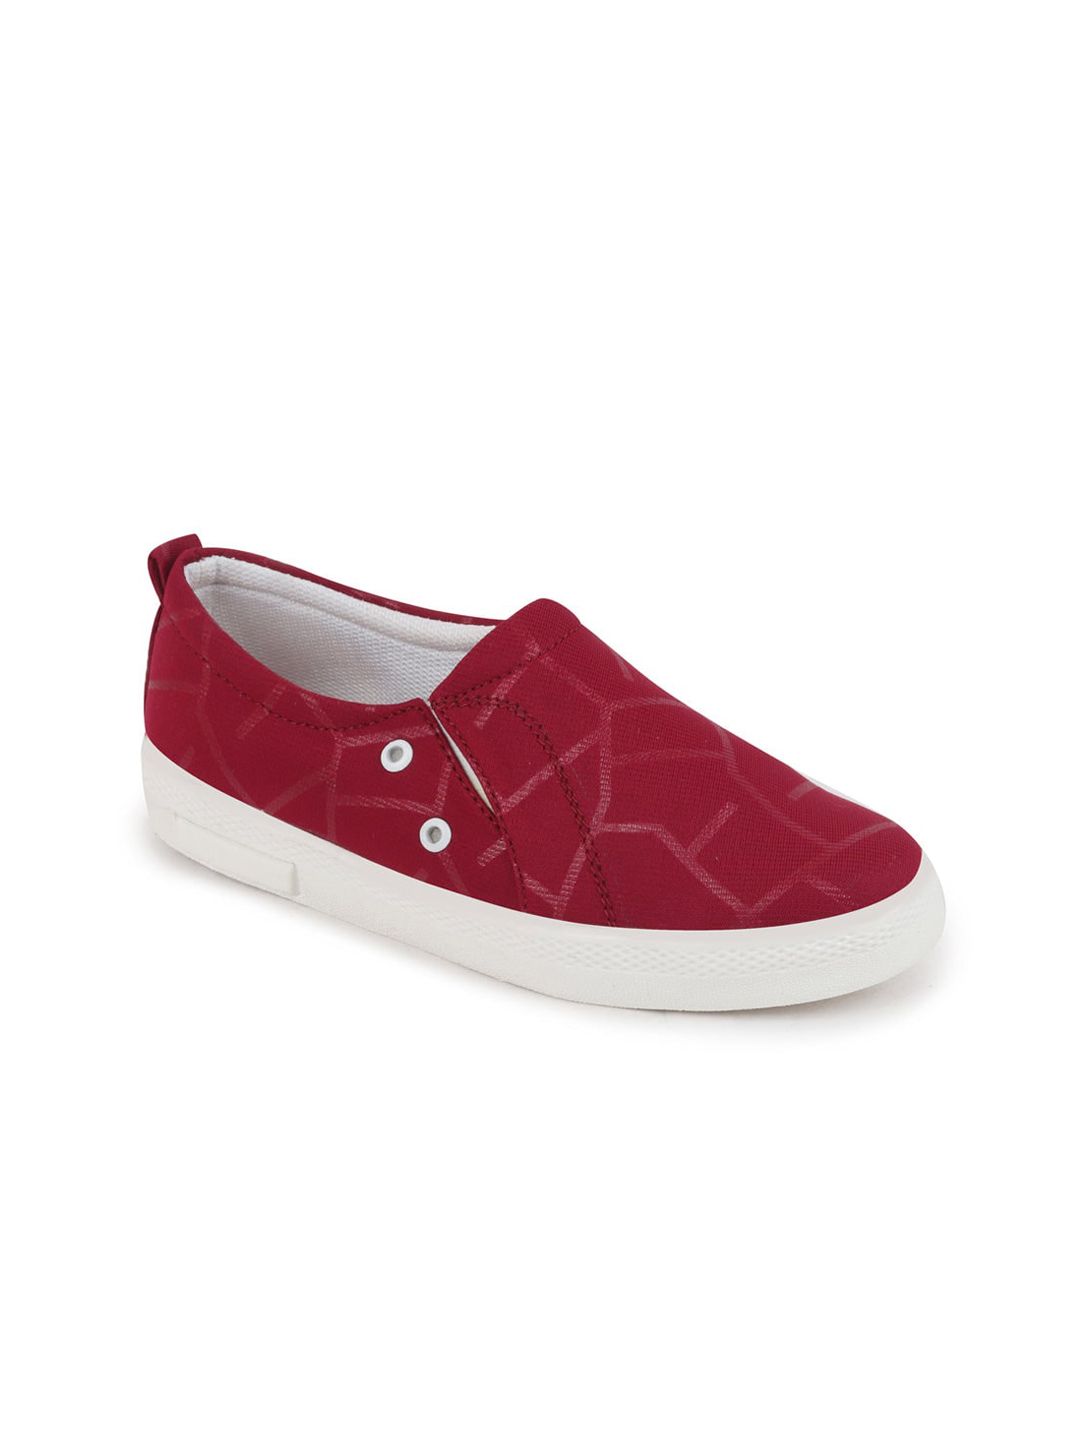 FAUSTO Women Red Printed Slip-On Sneakers Price in India